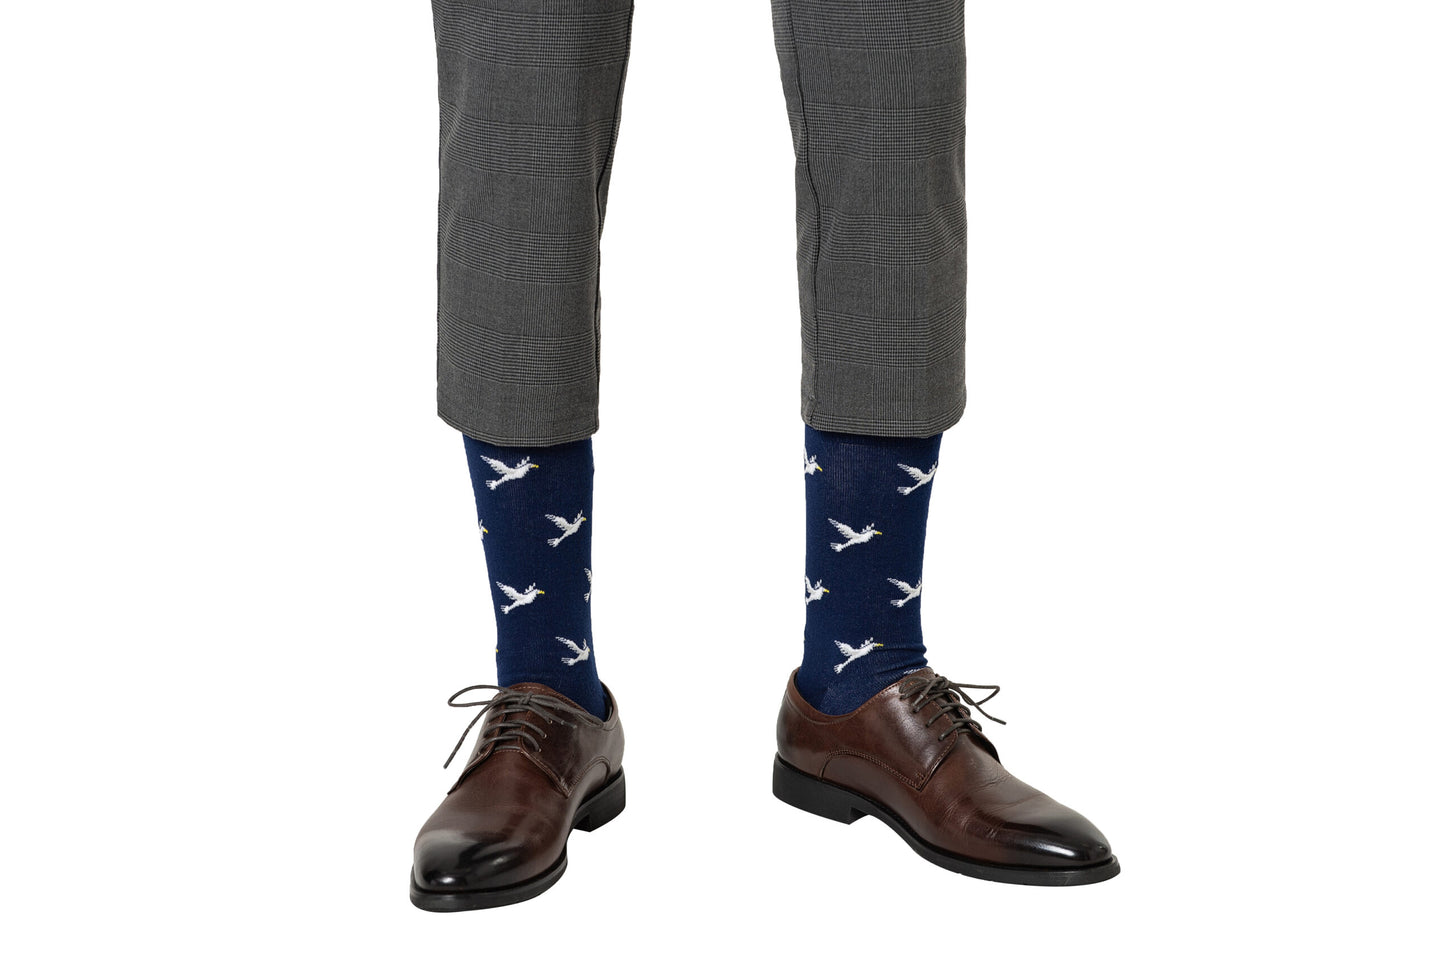 A man wearing a pair of blue Dove socks with white birds on them.